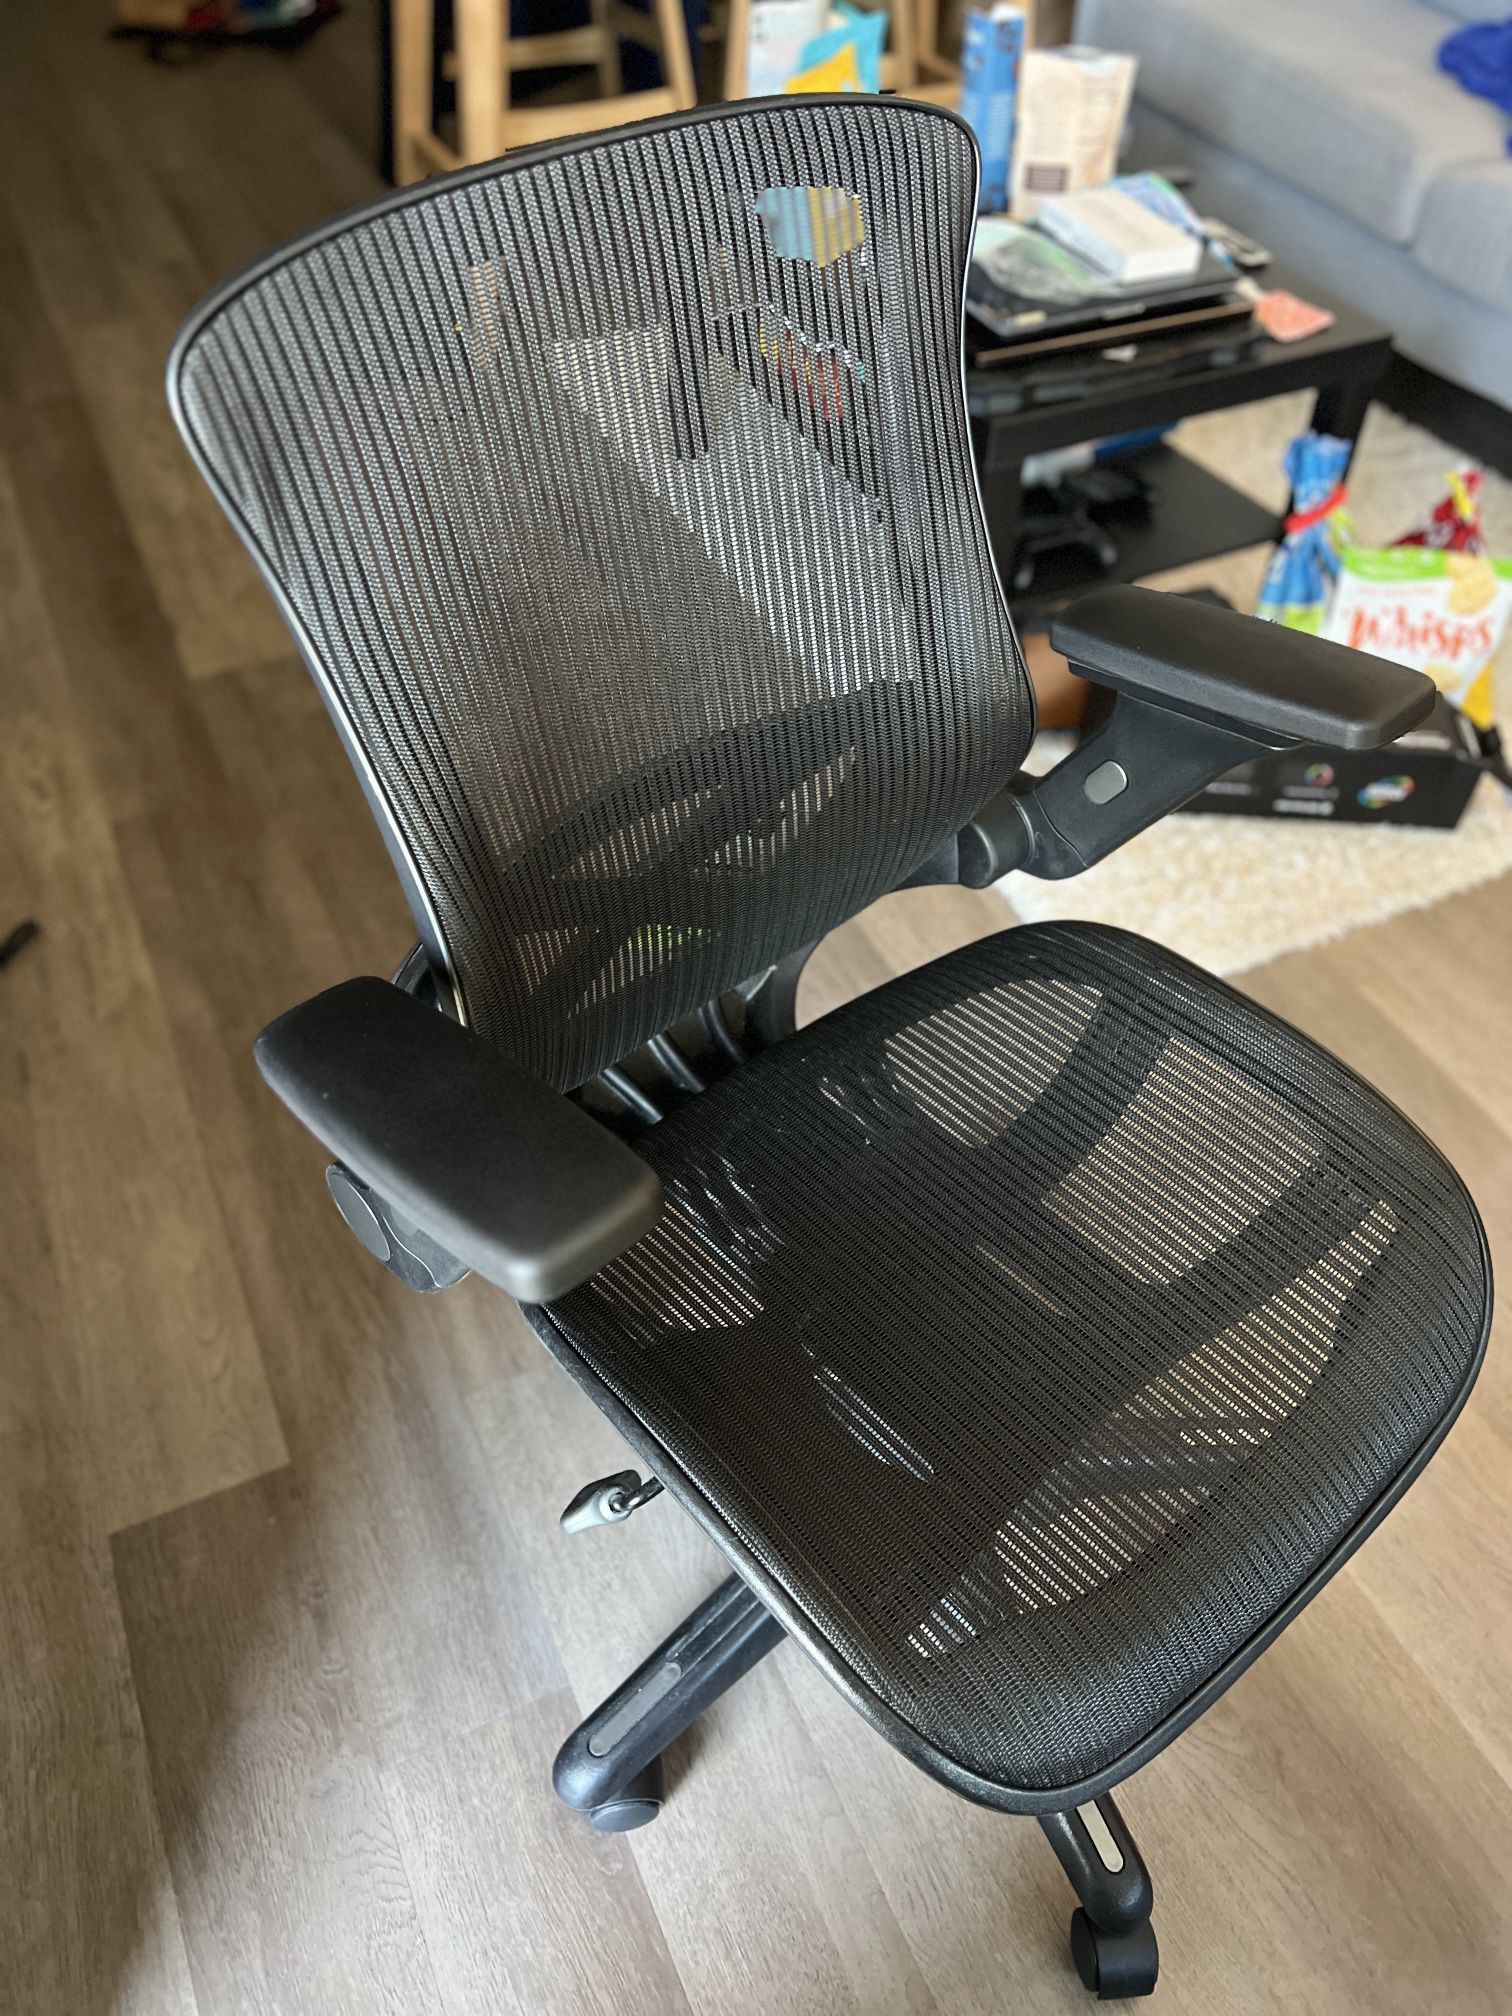 Bayside Furnishings Metrex Iv Mesh Office Chair for Sale in Pomona, CA -  OfferUp